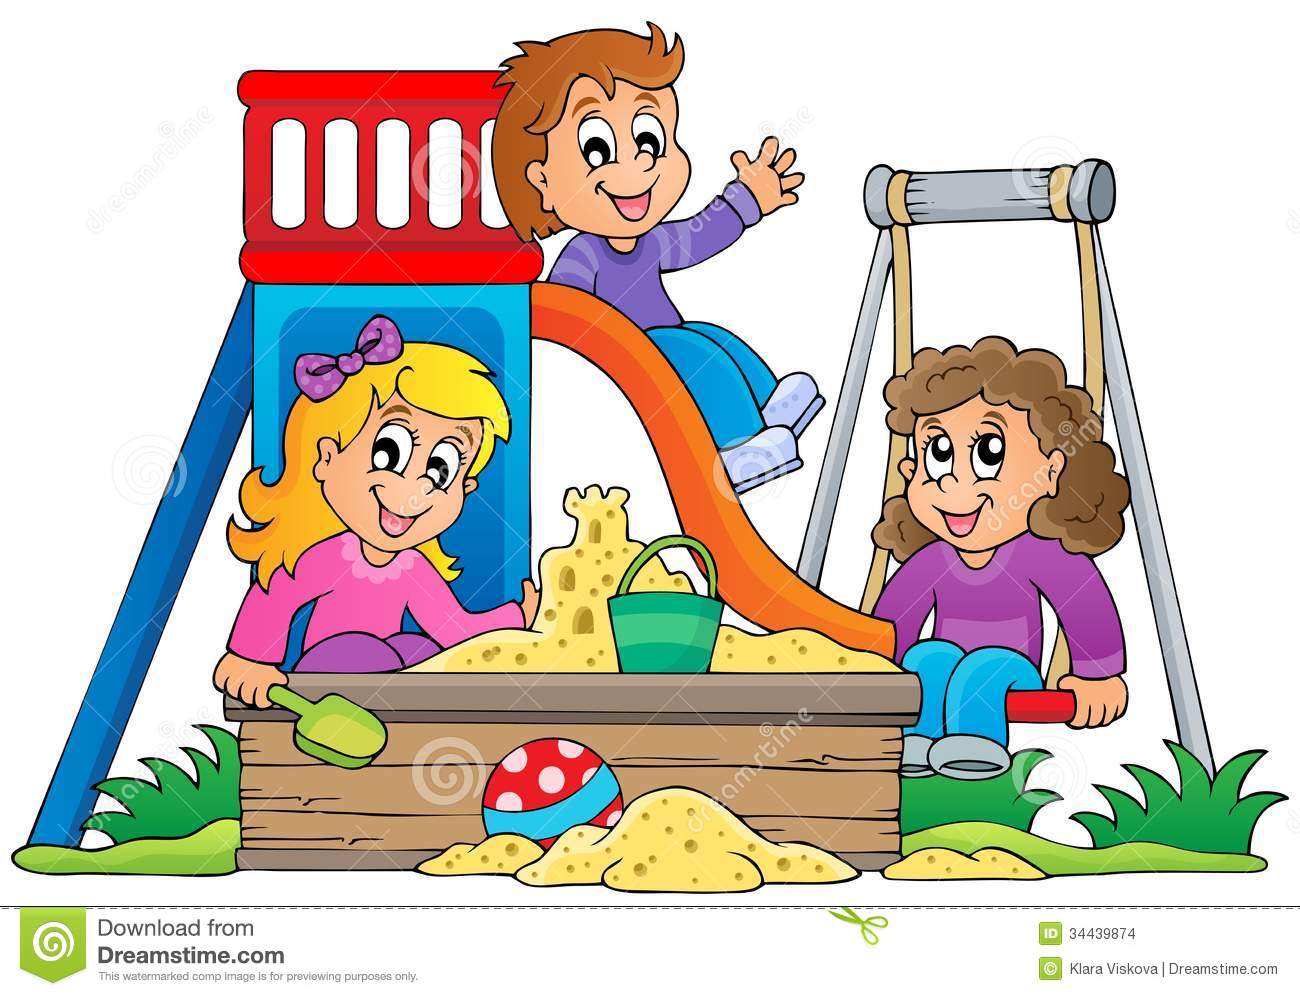 Kids playing on school playground clipart.